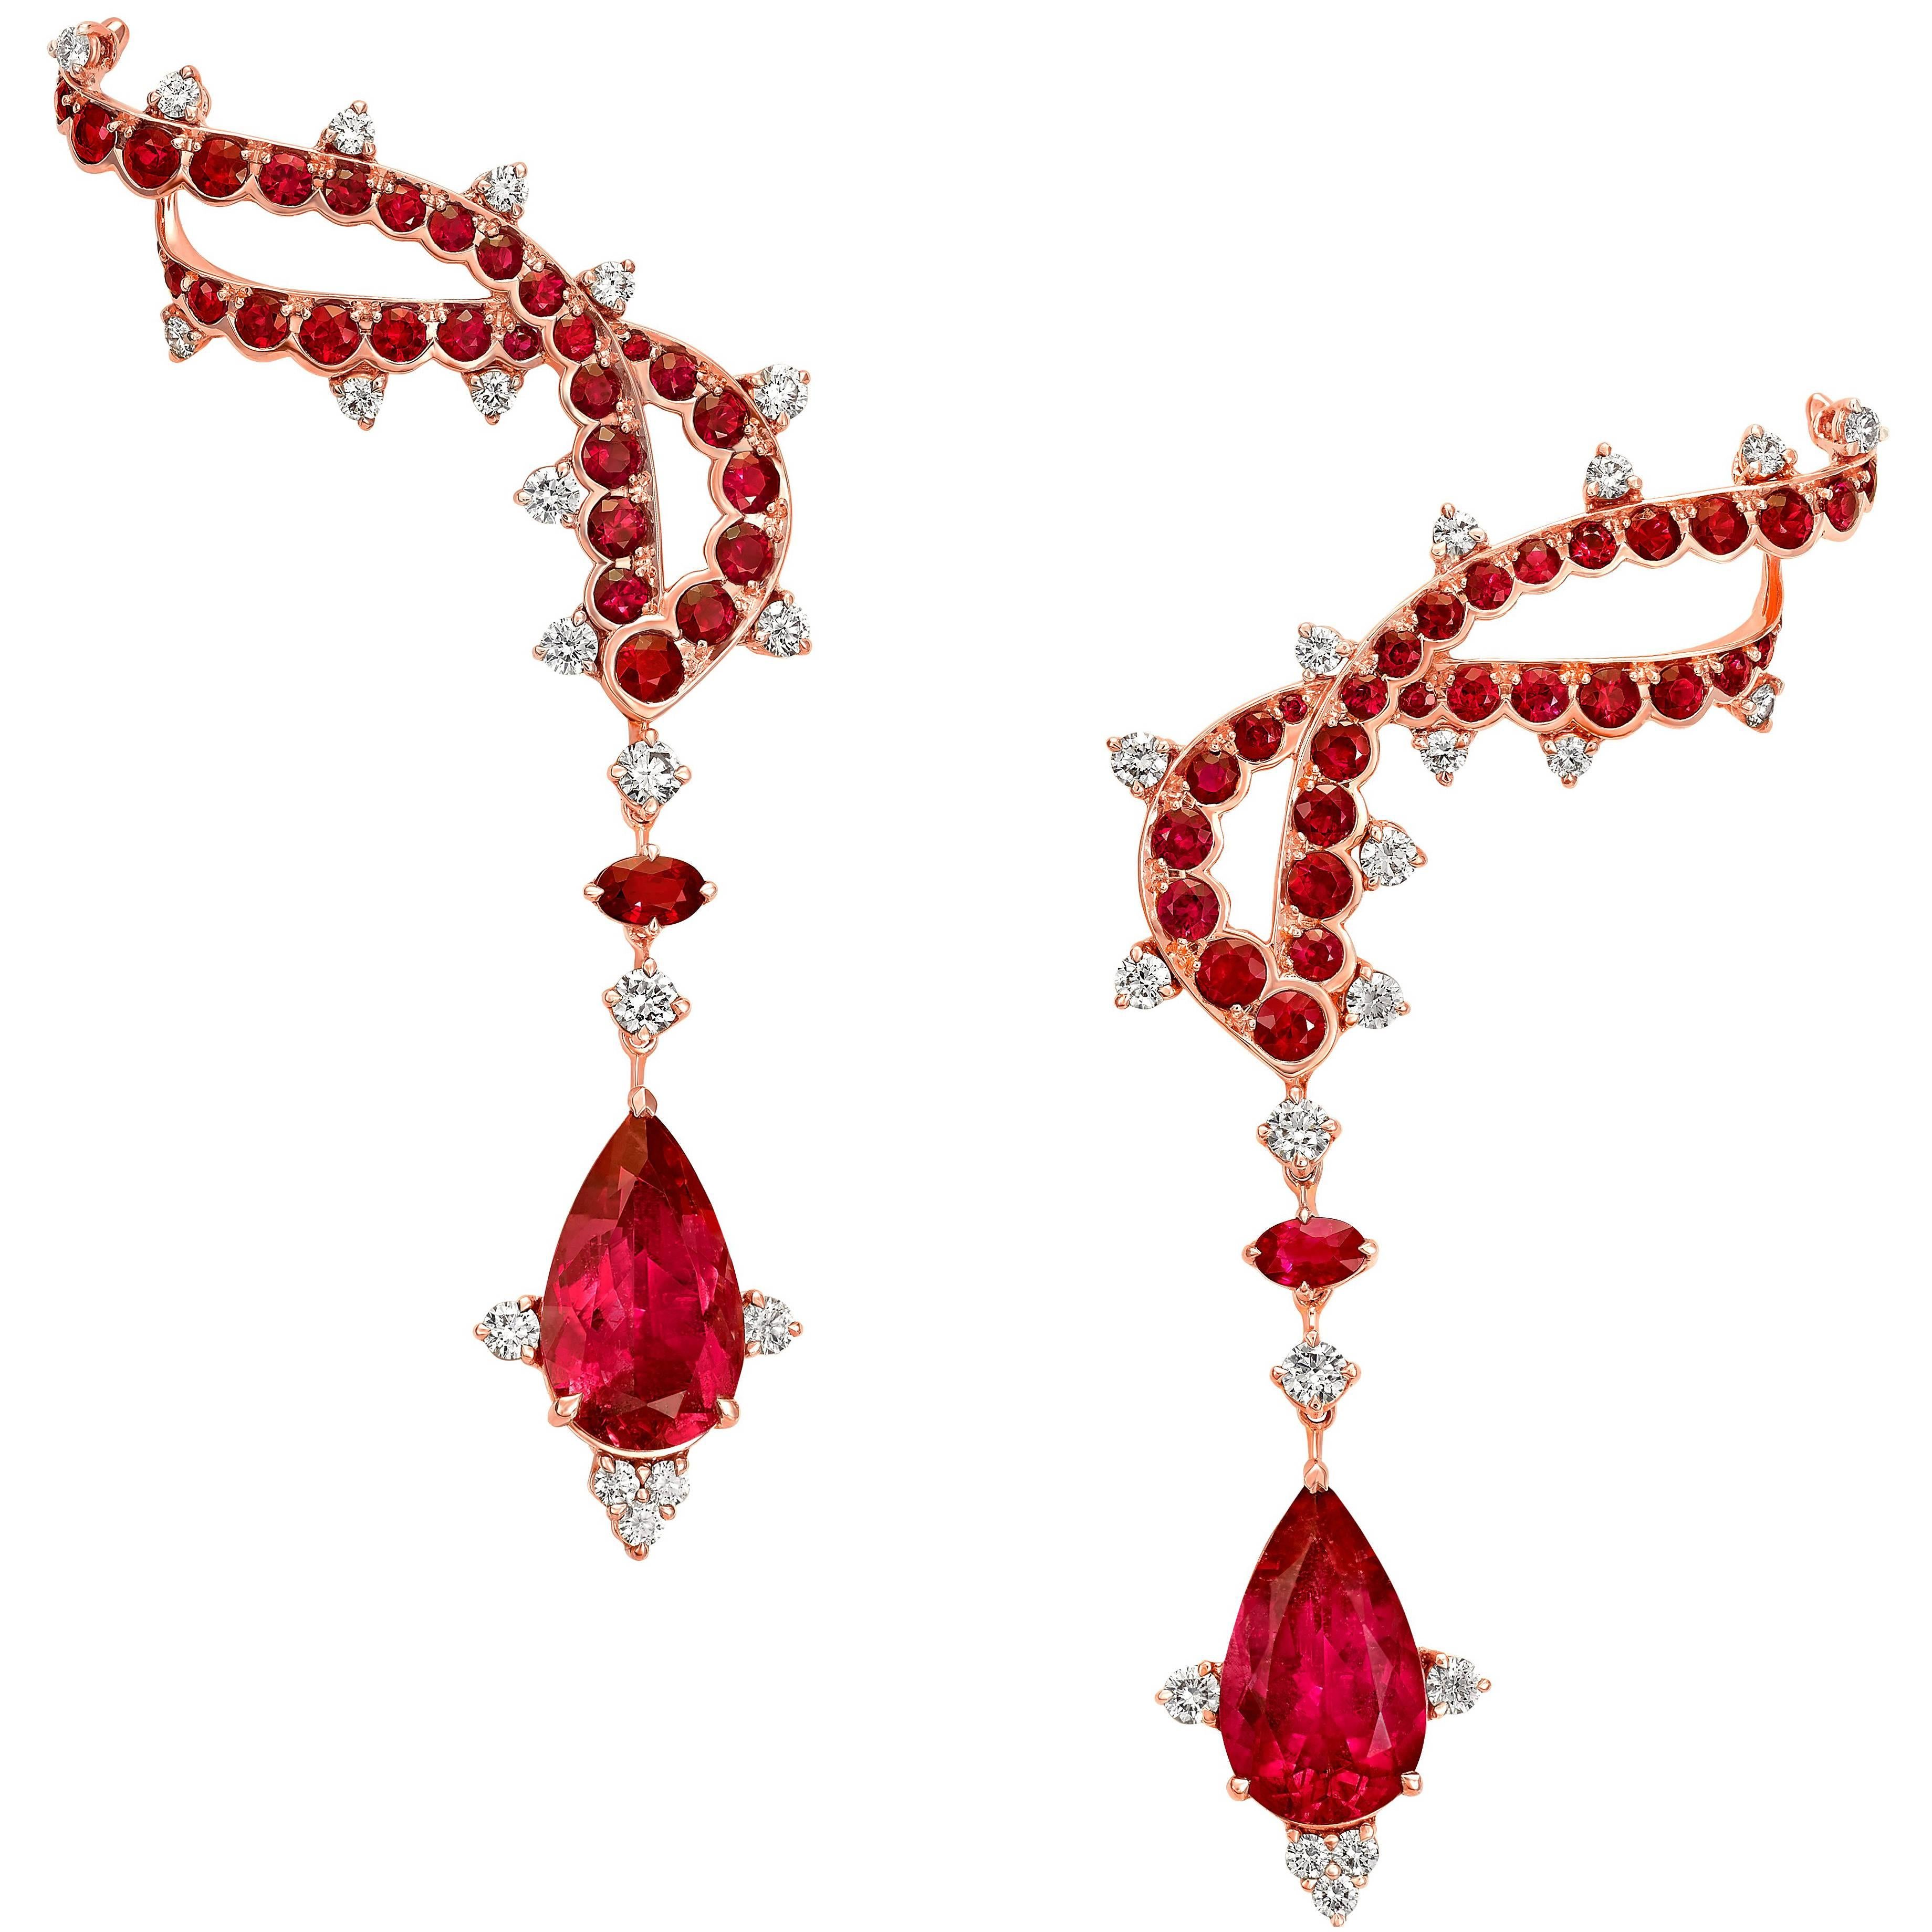 Rose Gold, White Diamonds, Mozambican Rubies and Rubellite Ear Climbers Earrings